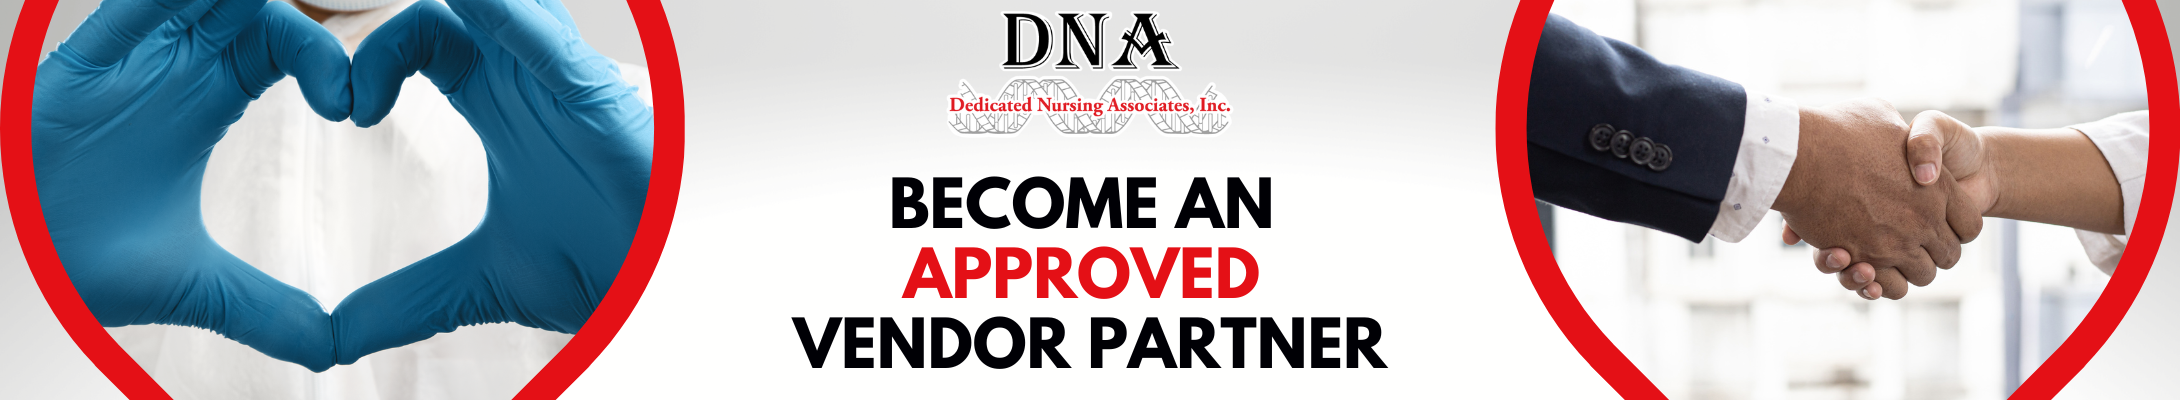 become an approved vendor partner (2)